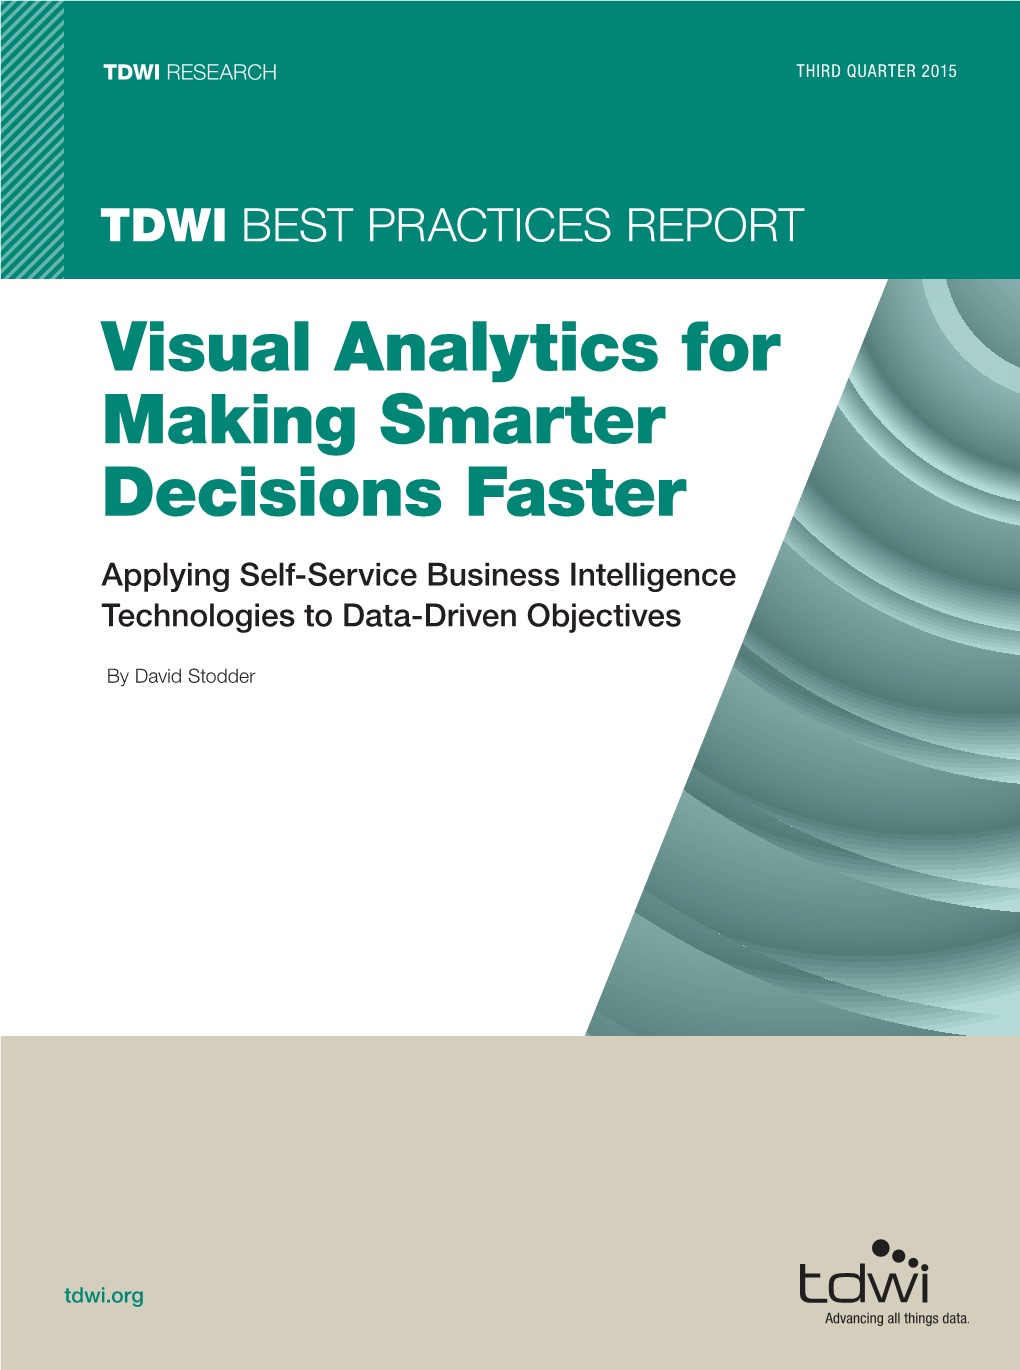 Visual Analytics for Making Smarter Decisions Faster Applying Self-Service Business Intelligence Technologies to Data-Driven Objectives